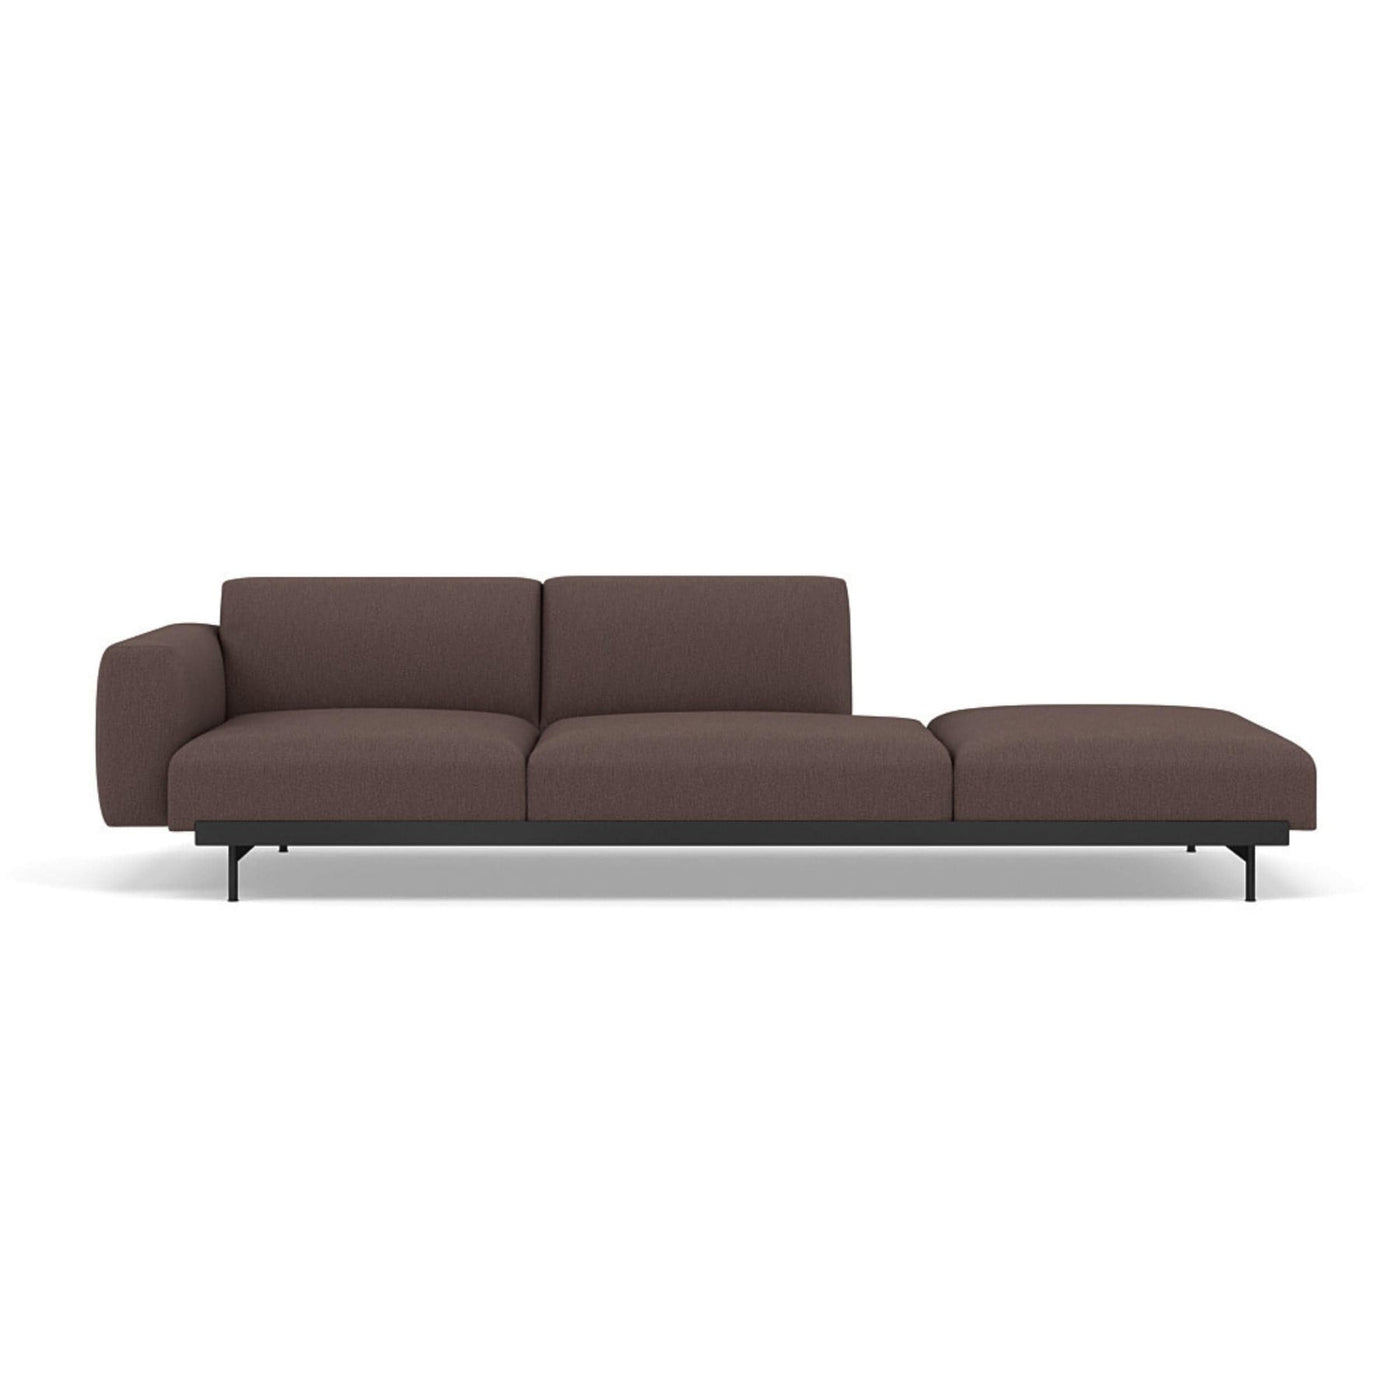 Muuto In Situ Sofa 3 seater configuration 5 in clay 6 fabric. Made to order at someday designs. #colour_clay-6-red-brown